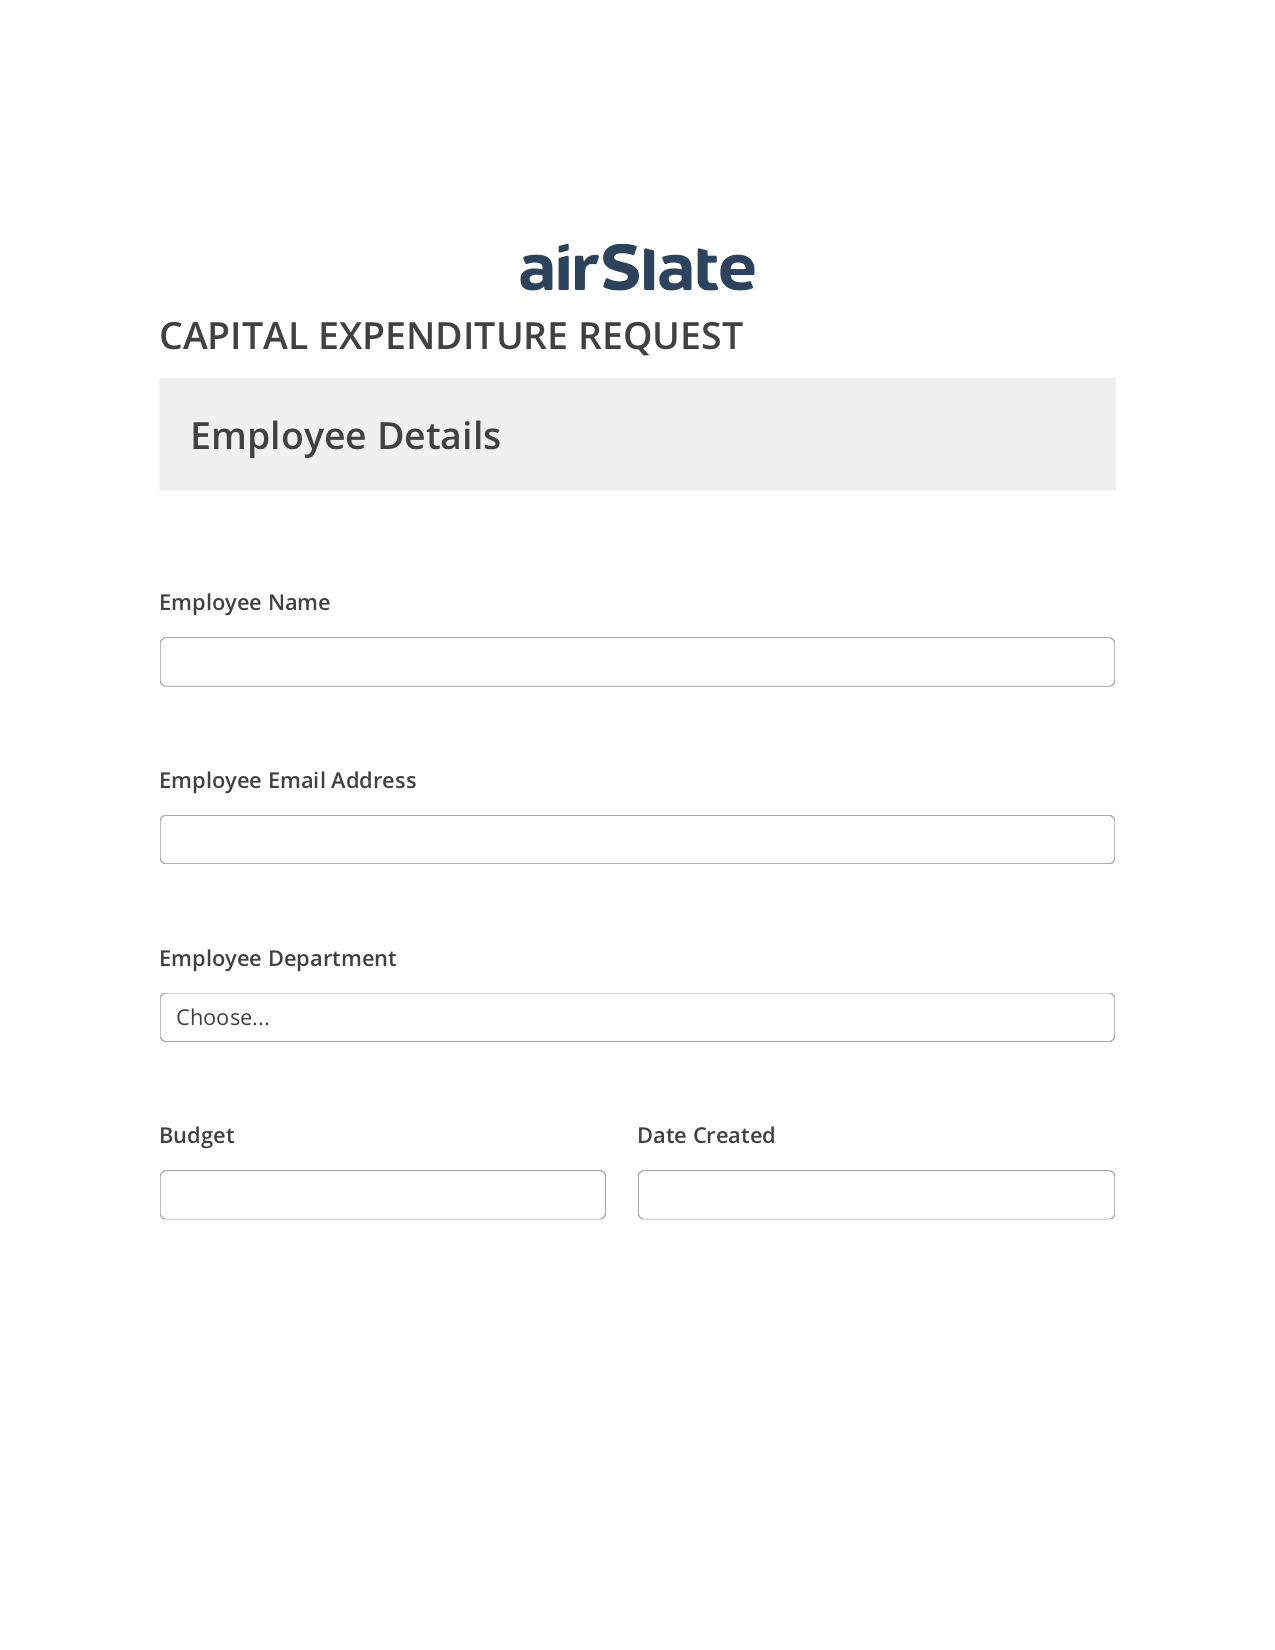 Capital Expenditure Request Approval Workflow Pre-fill Slate from MS Dynamics 365 record, Lock the Slate Bot, Archive to Google Drive